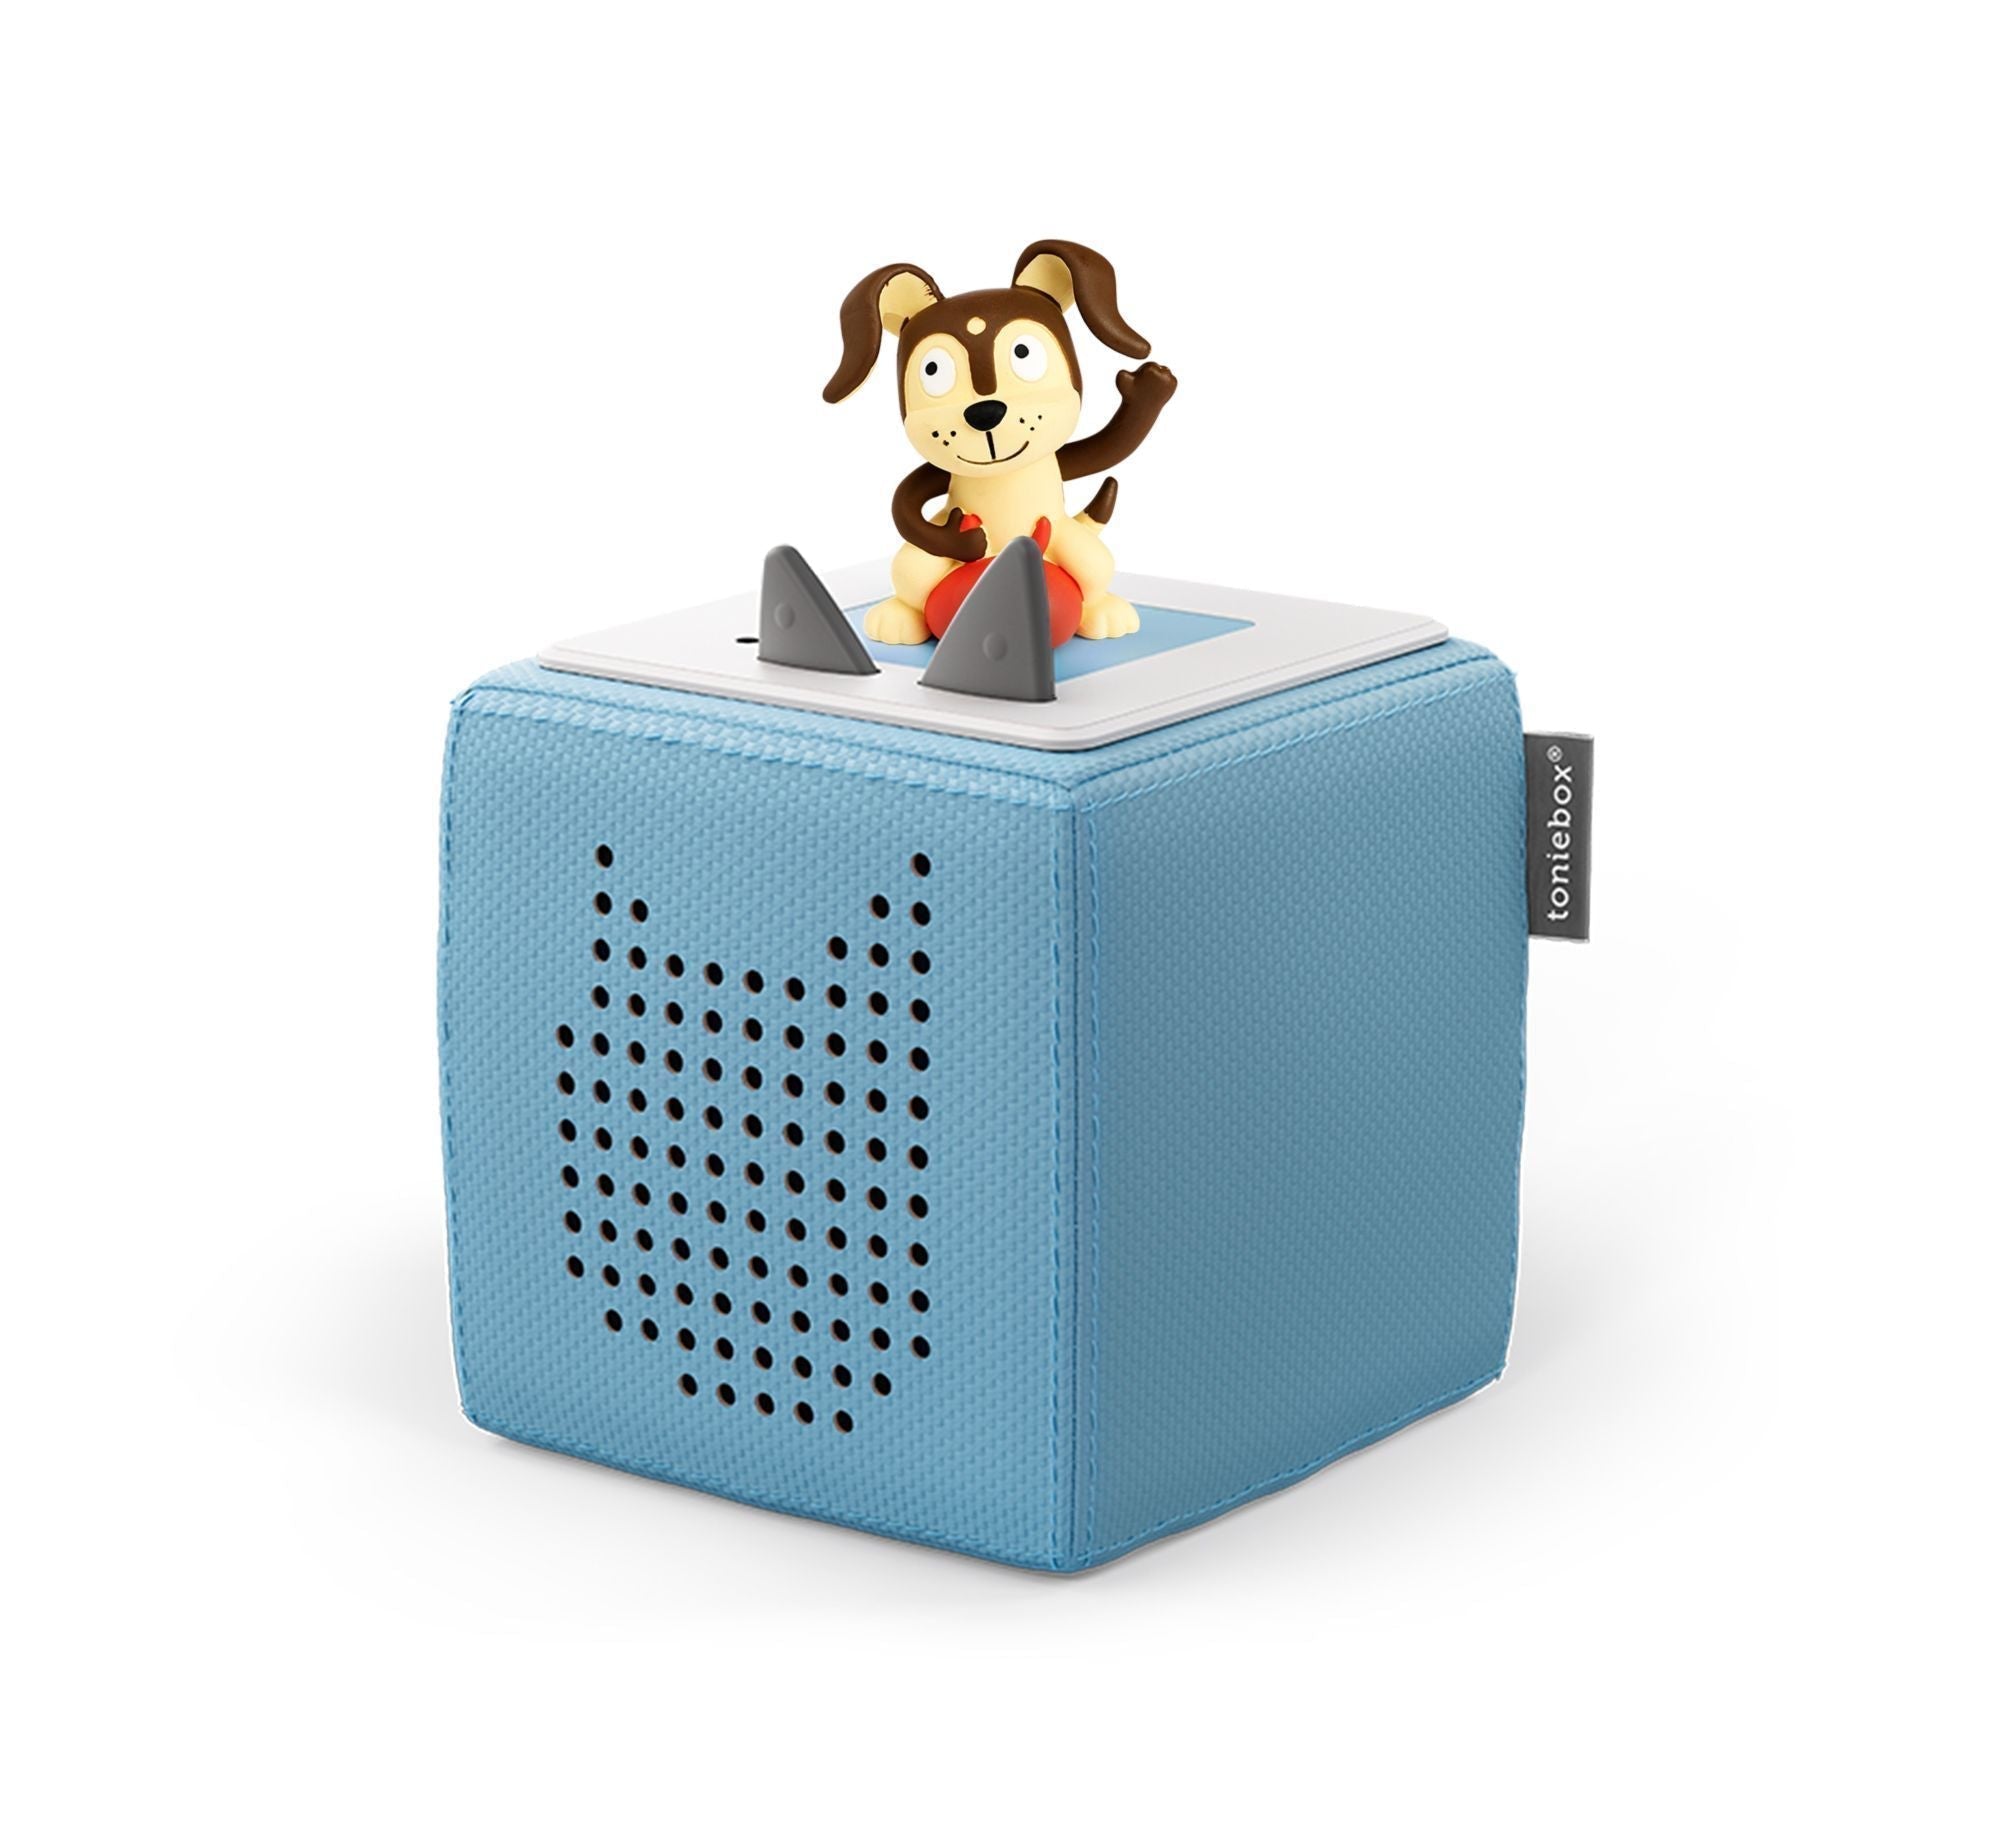 Tonies Toniebox Playtime Puppy Starter Set and Carry Case Light Blue with Tonies Audio Play Figurine - ANB Baby -$75 - $100